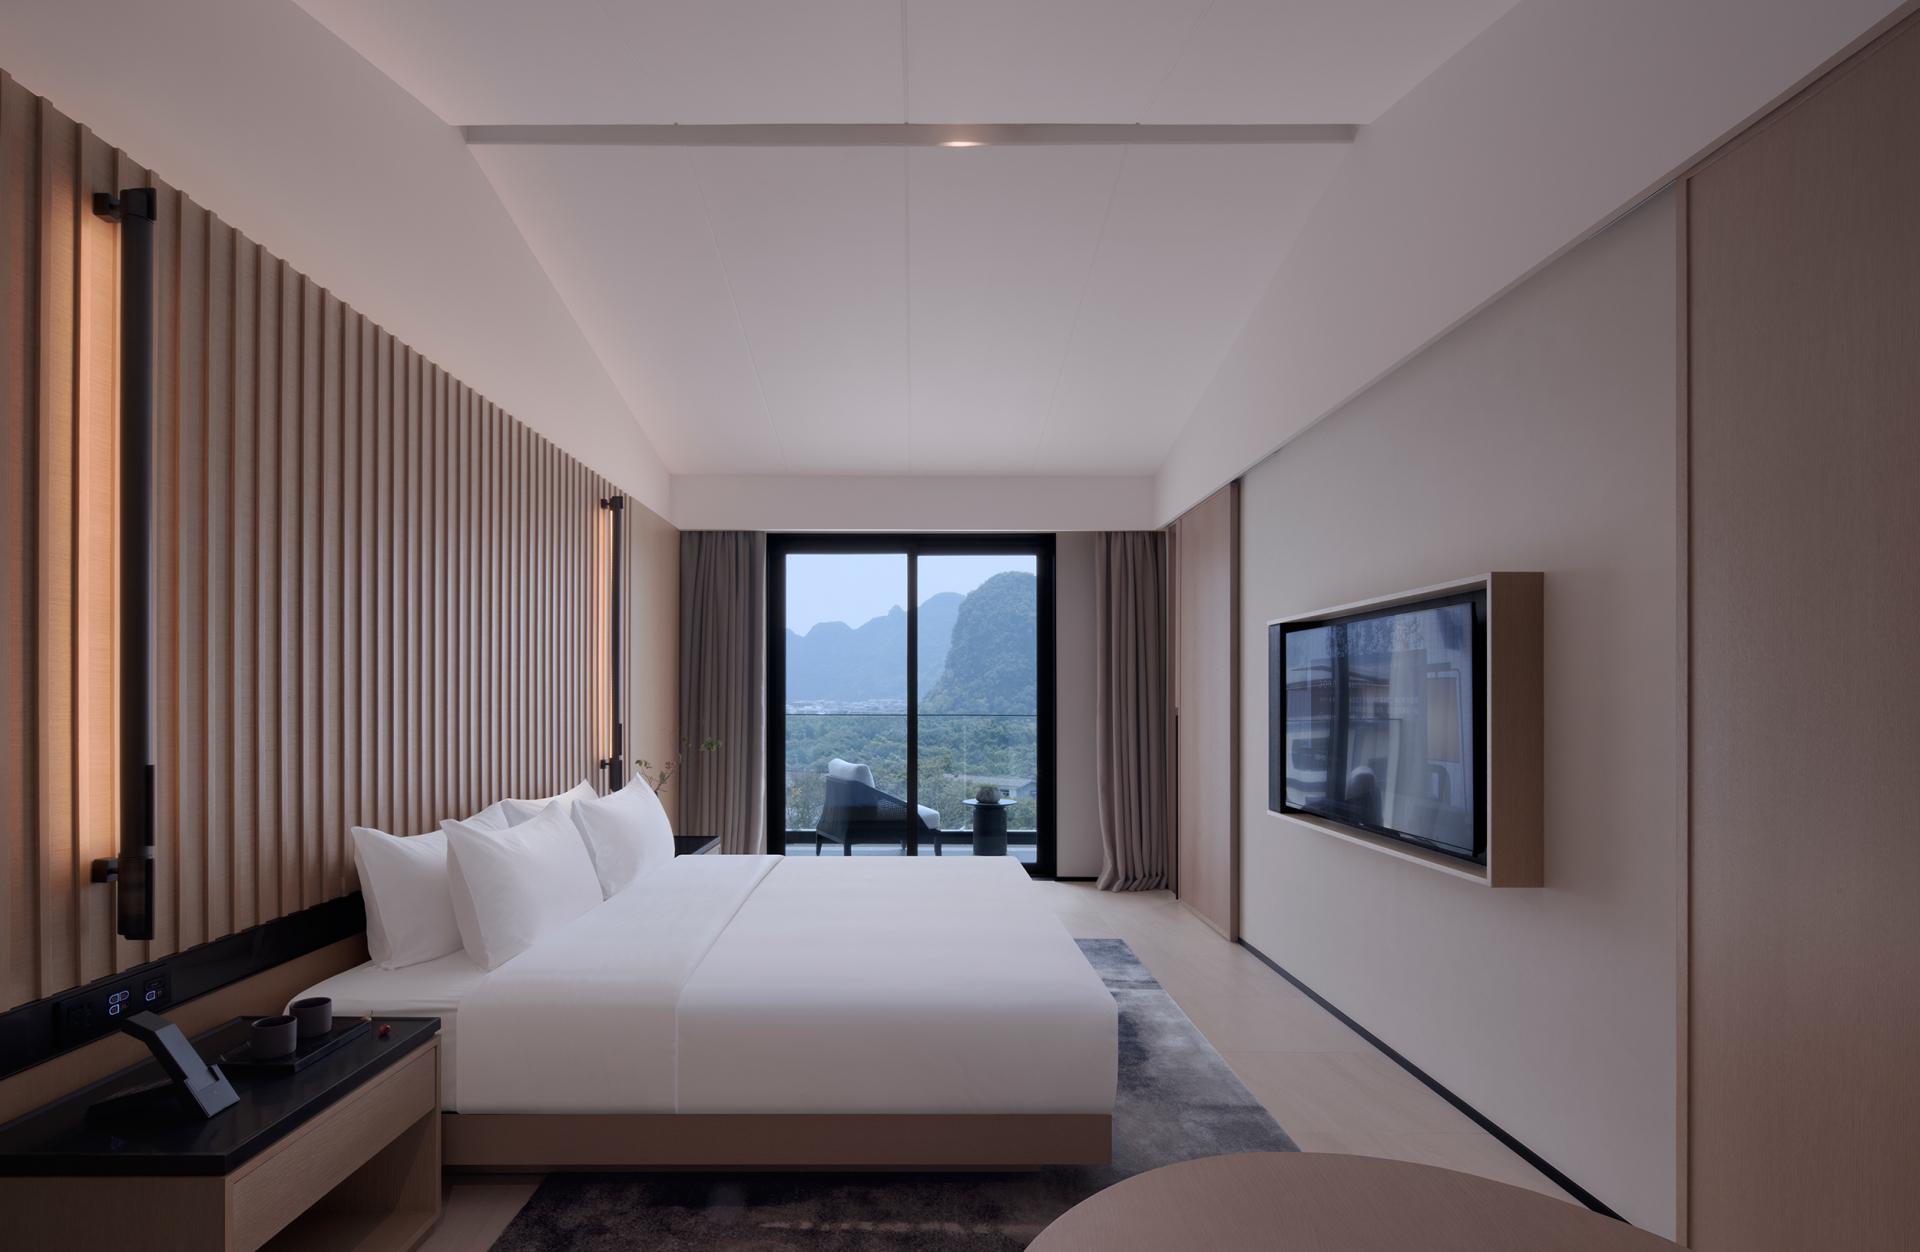 This Guilin Mountainside Hotel Is a Minimalist Masterpiece